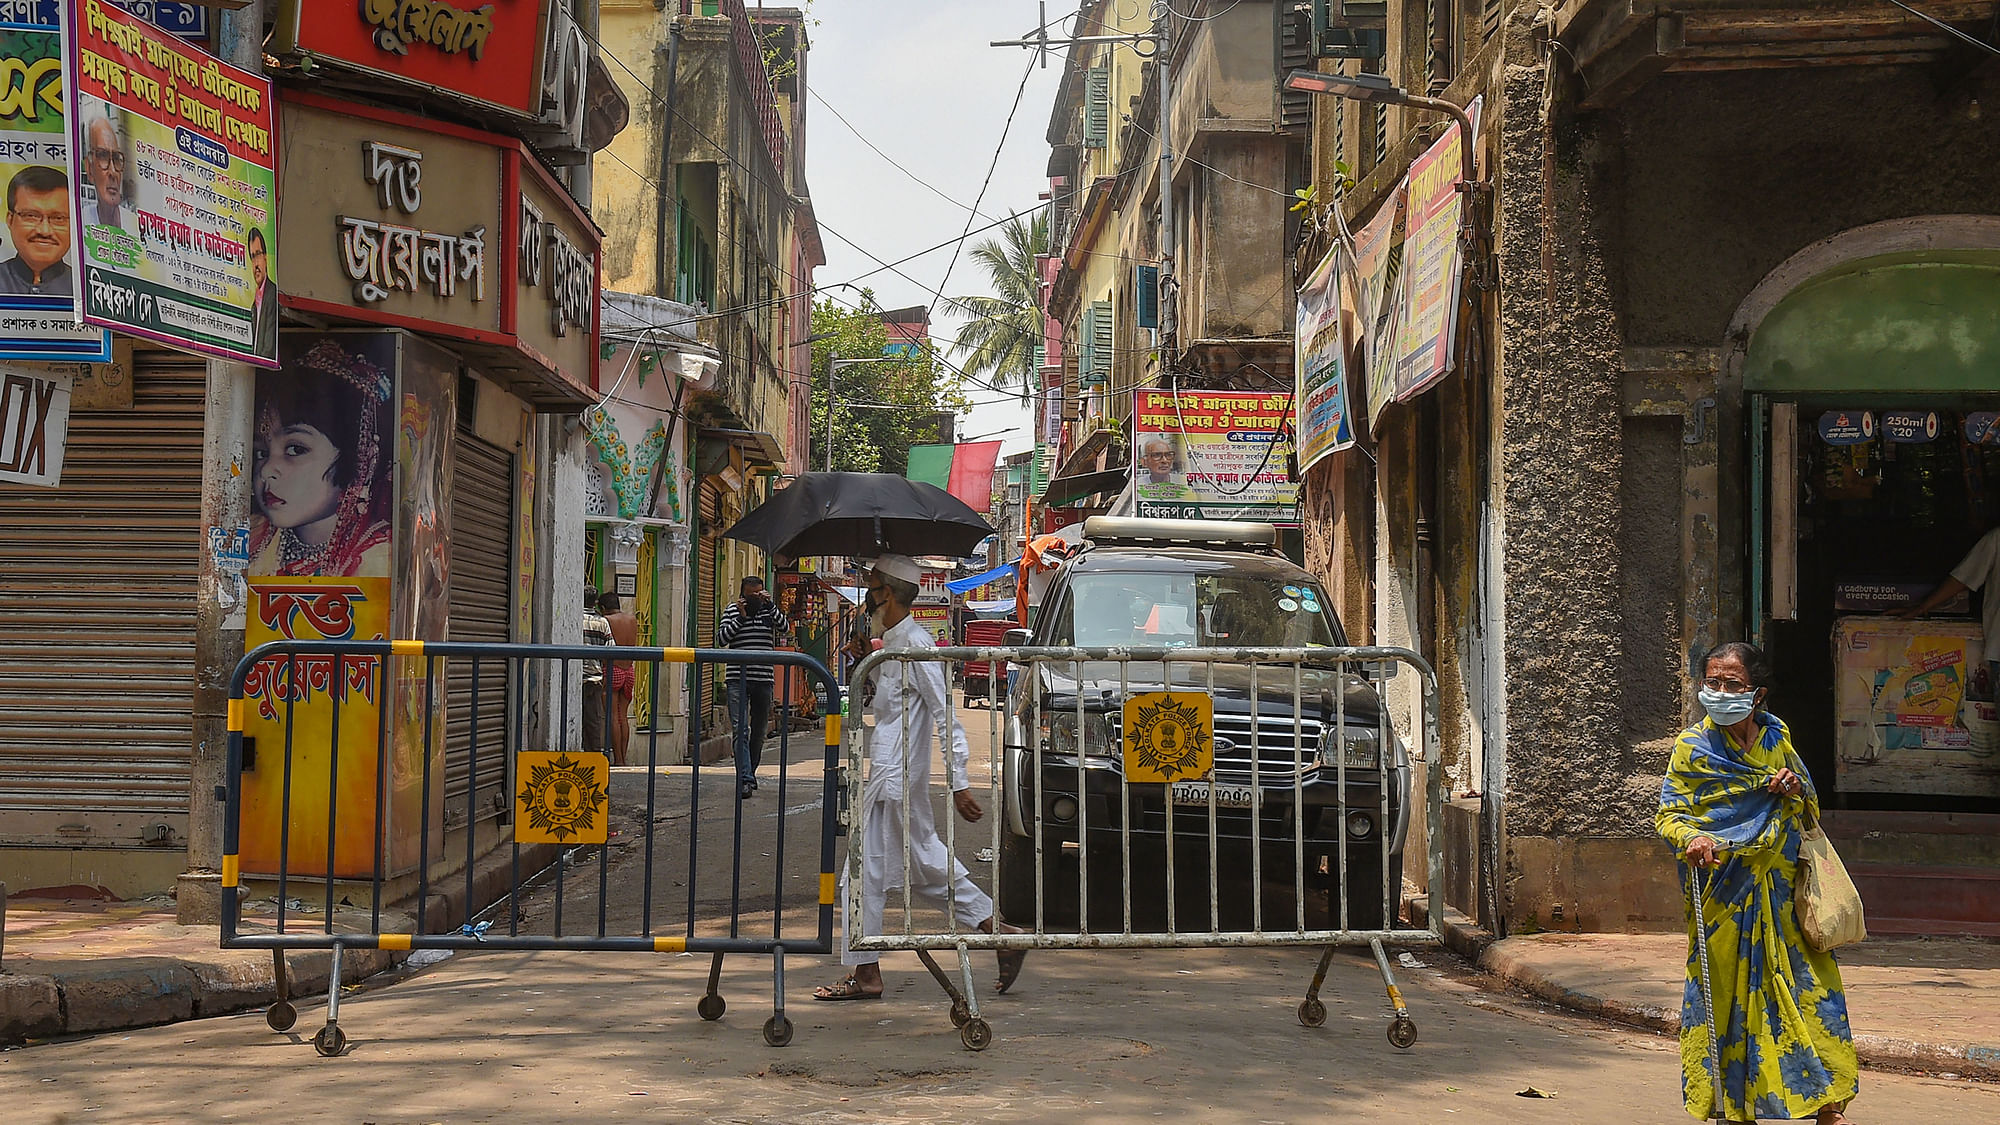 Barricades are seen outside a lane to restrict entry and exit during the nationwide lockdown in Kolkata (Representational image).